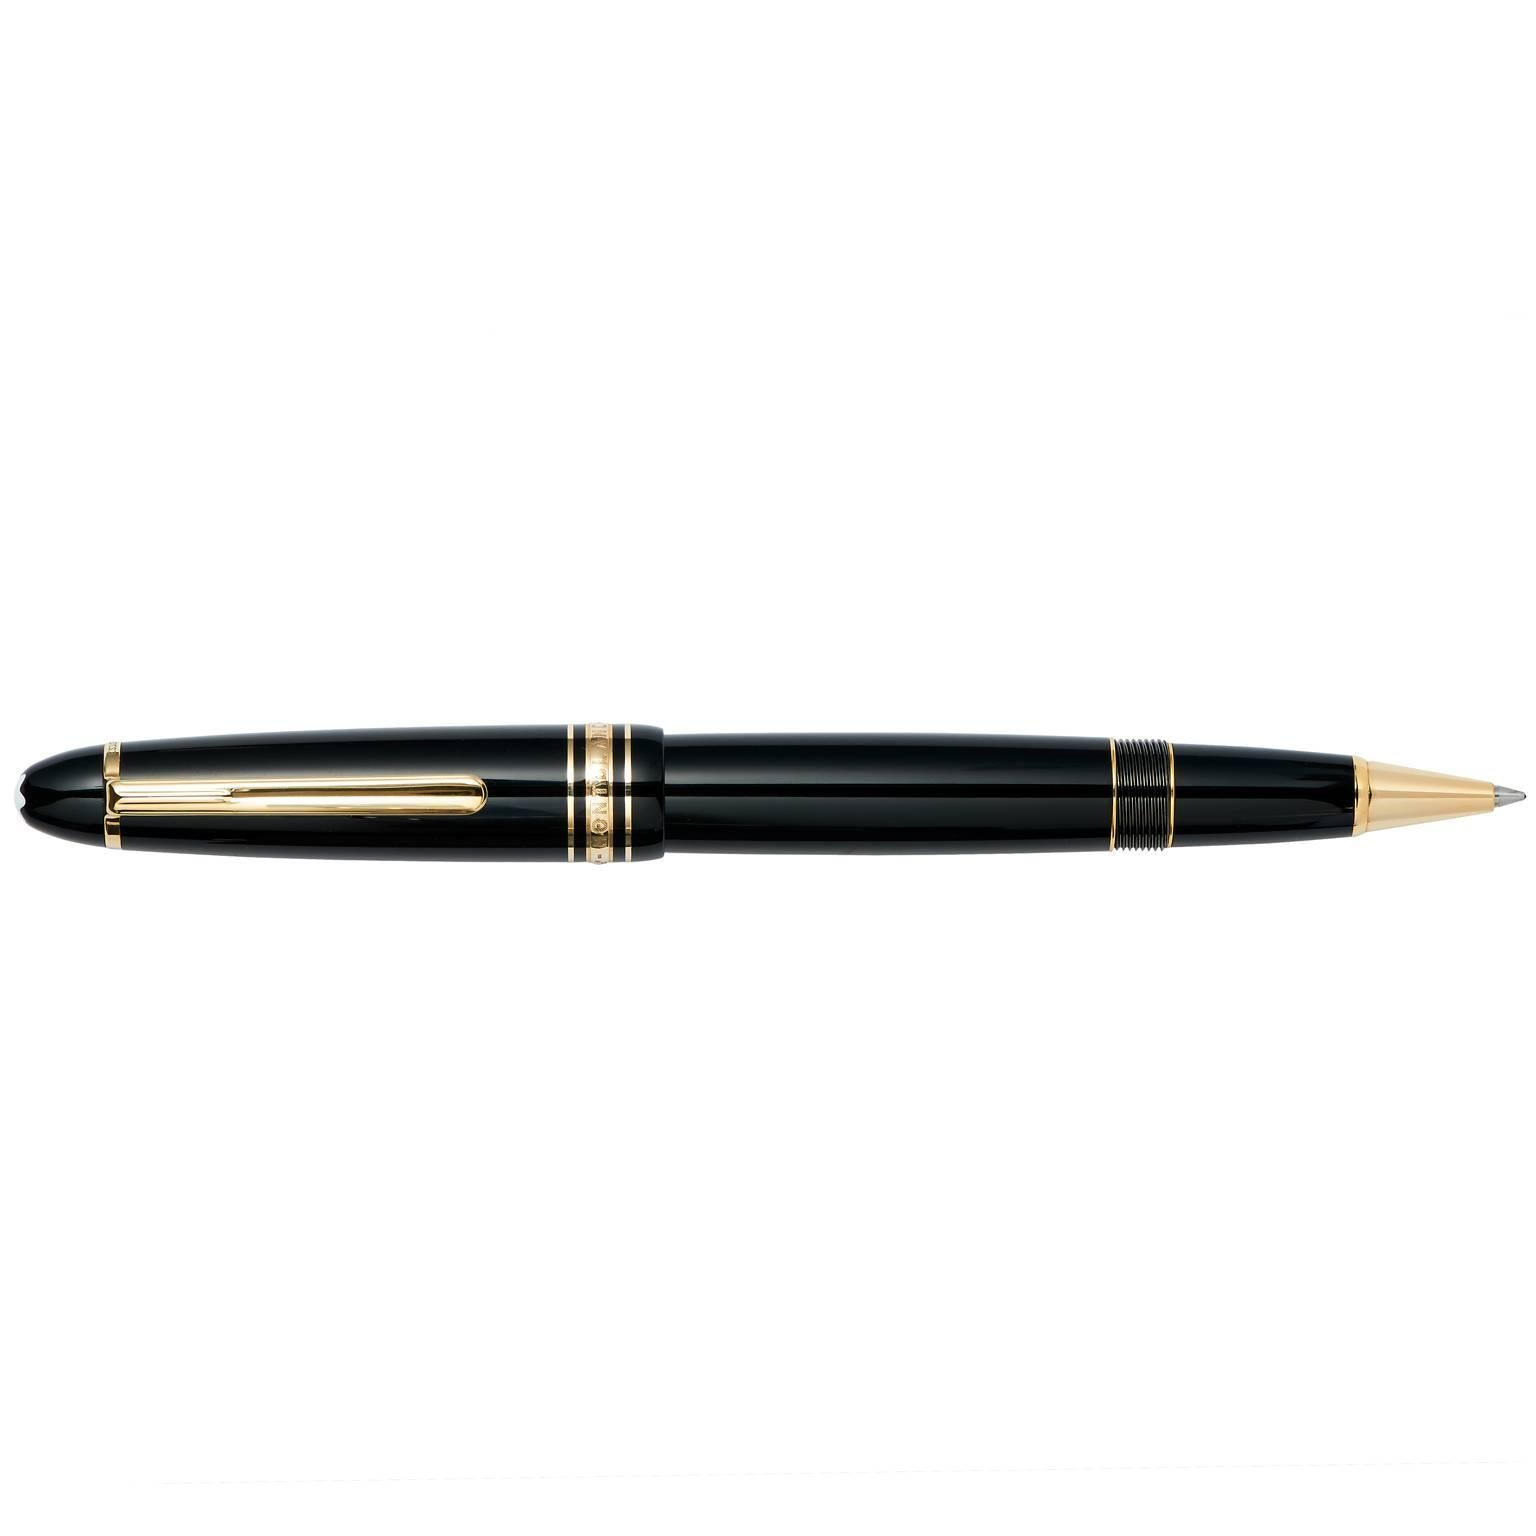 This Mont Blanc Meisterstuck Legrand rollerball pen is gold plated and features black resin. New Retail Price: $505. Our Price: $404.